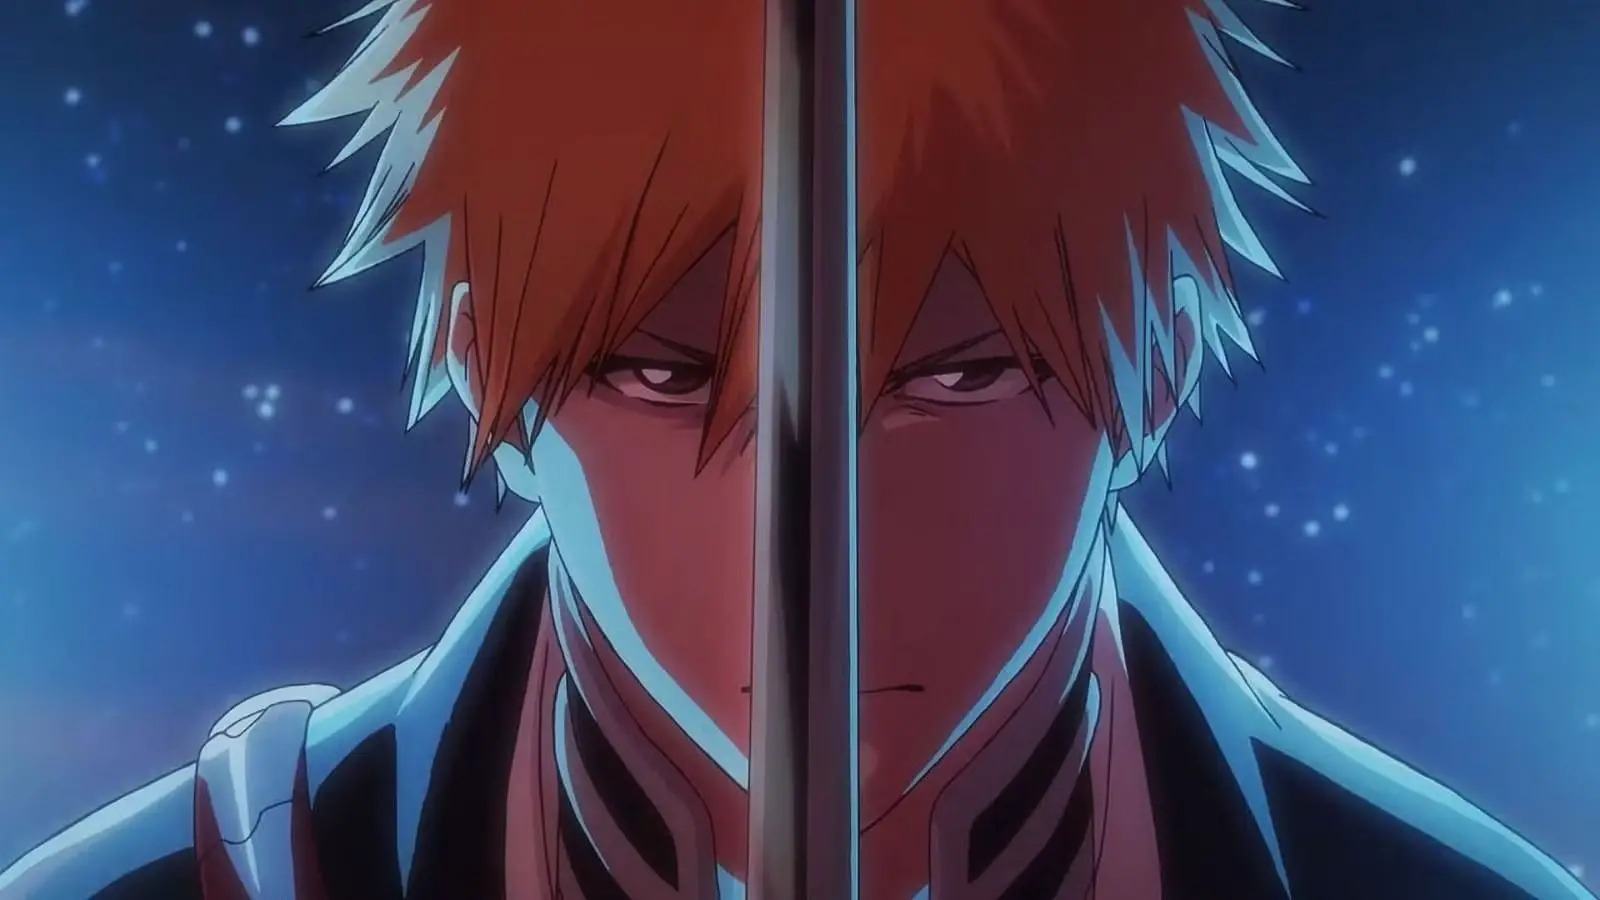 Bleach TYBW Part 2 Episode 2 Release Date, Time, Preview, Watch Online, And More 